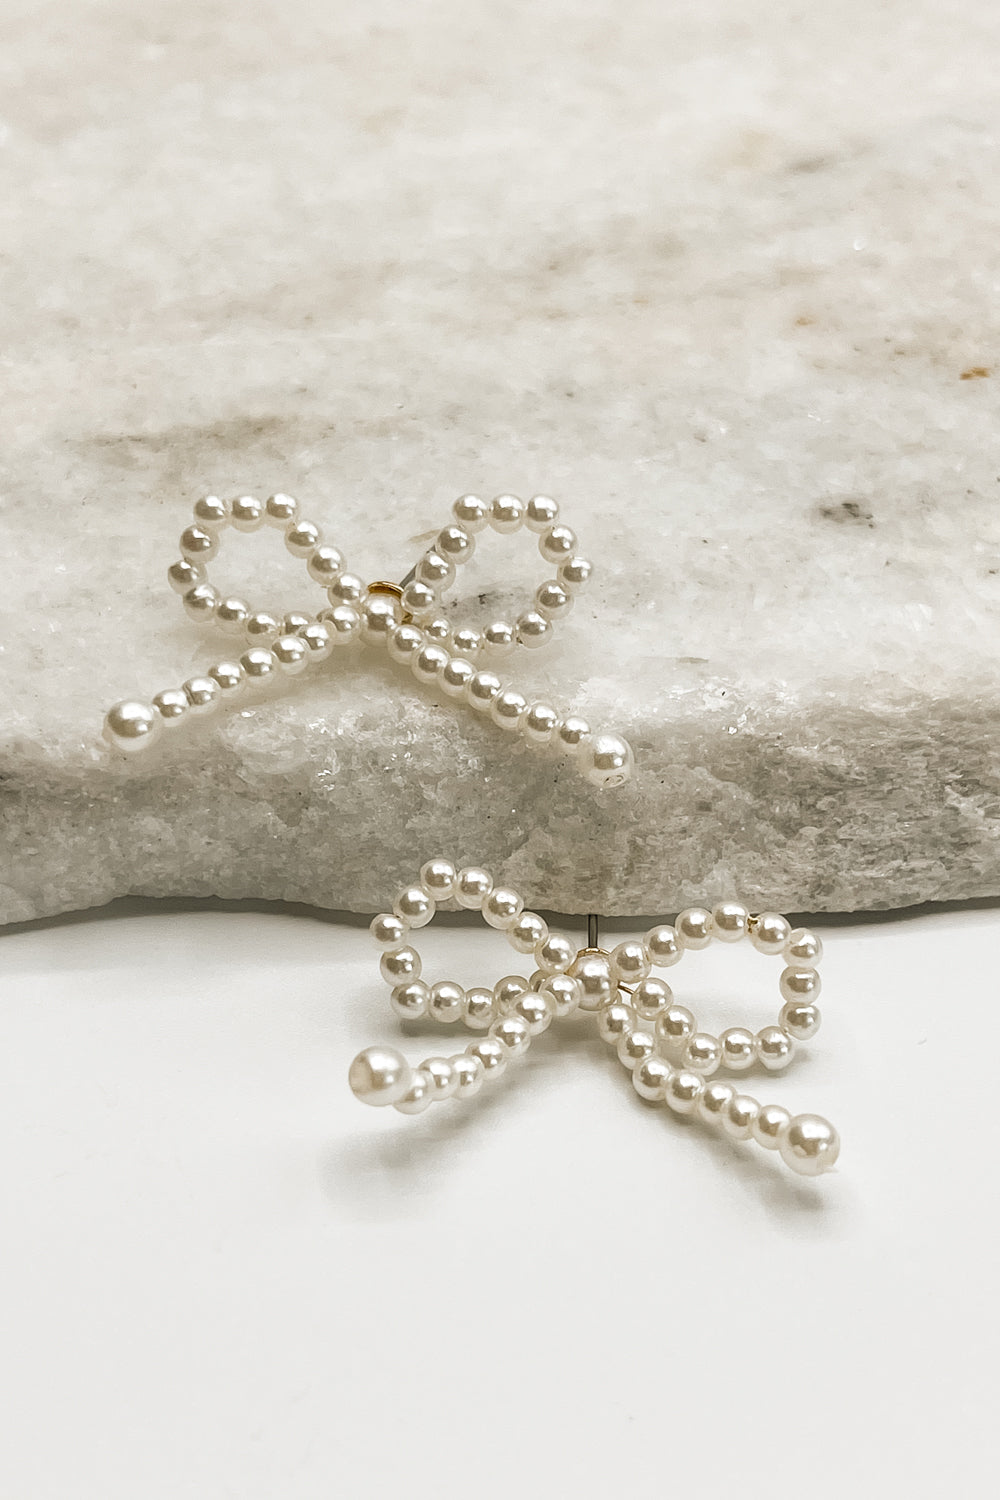 The Capri Bow Earrings are seen in an alternate view against a neutral background.